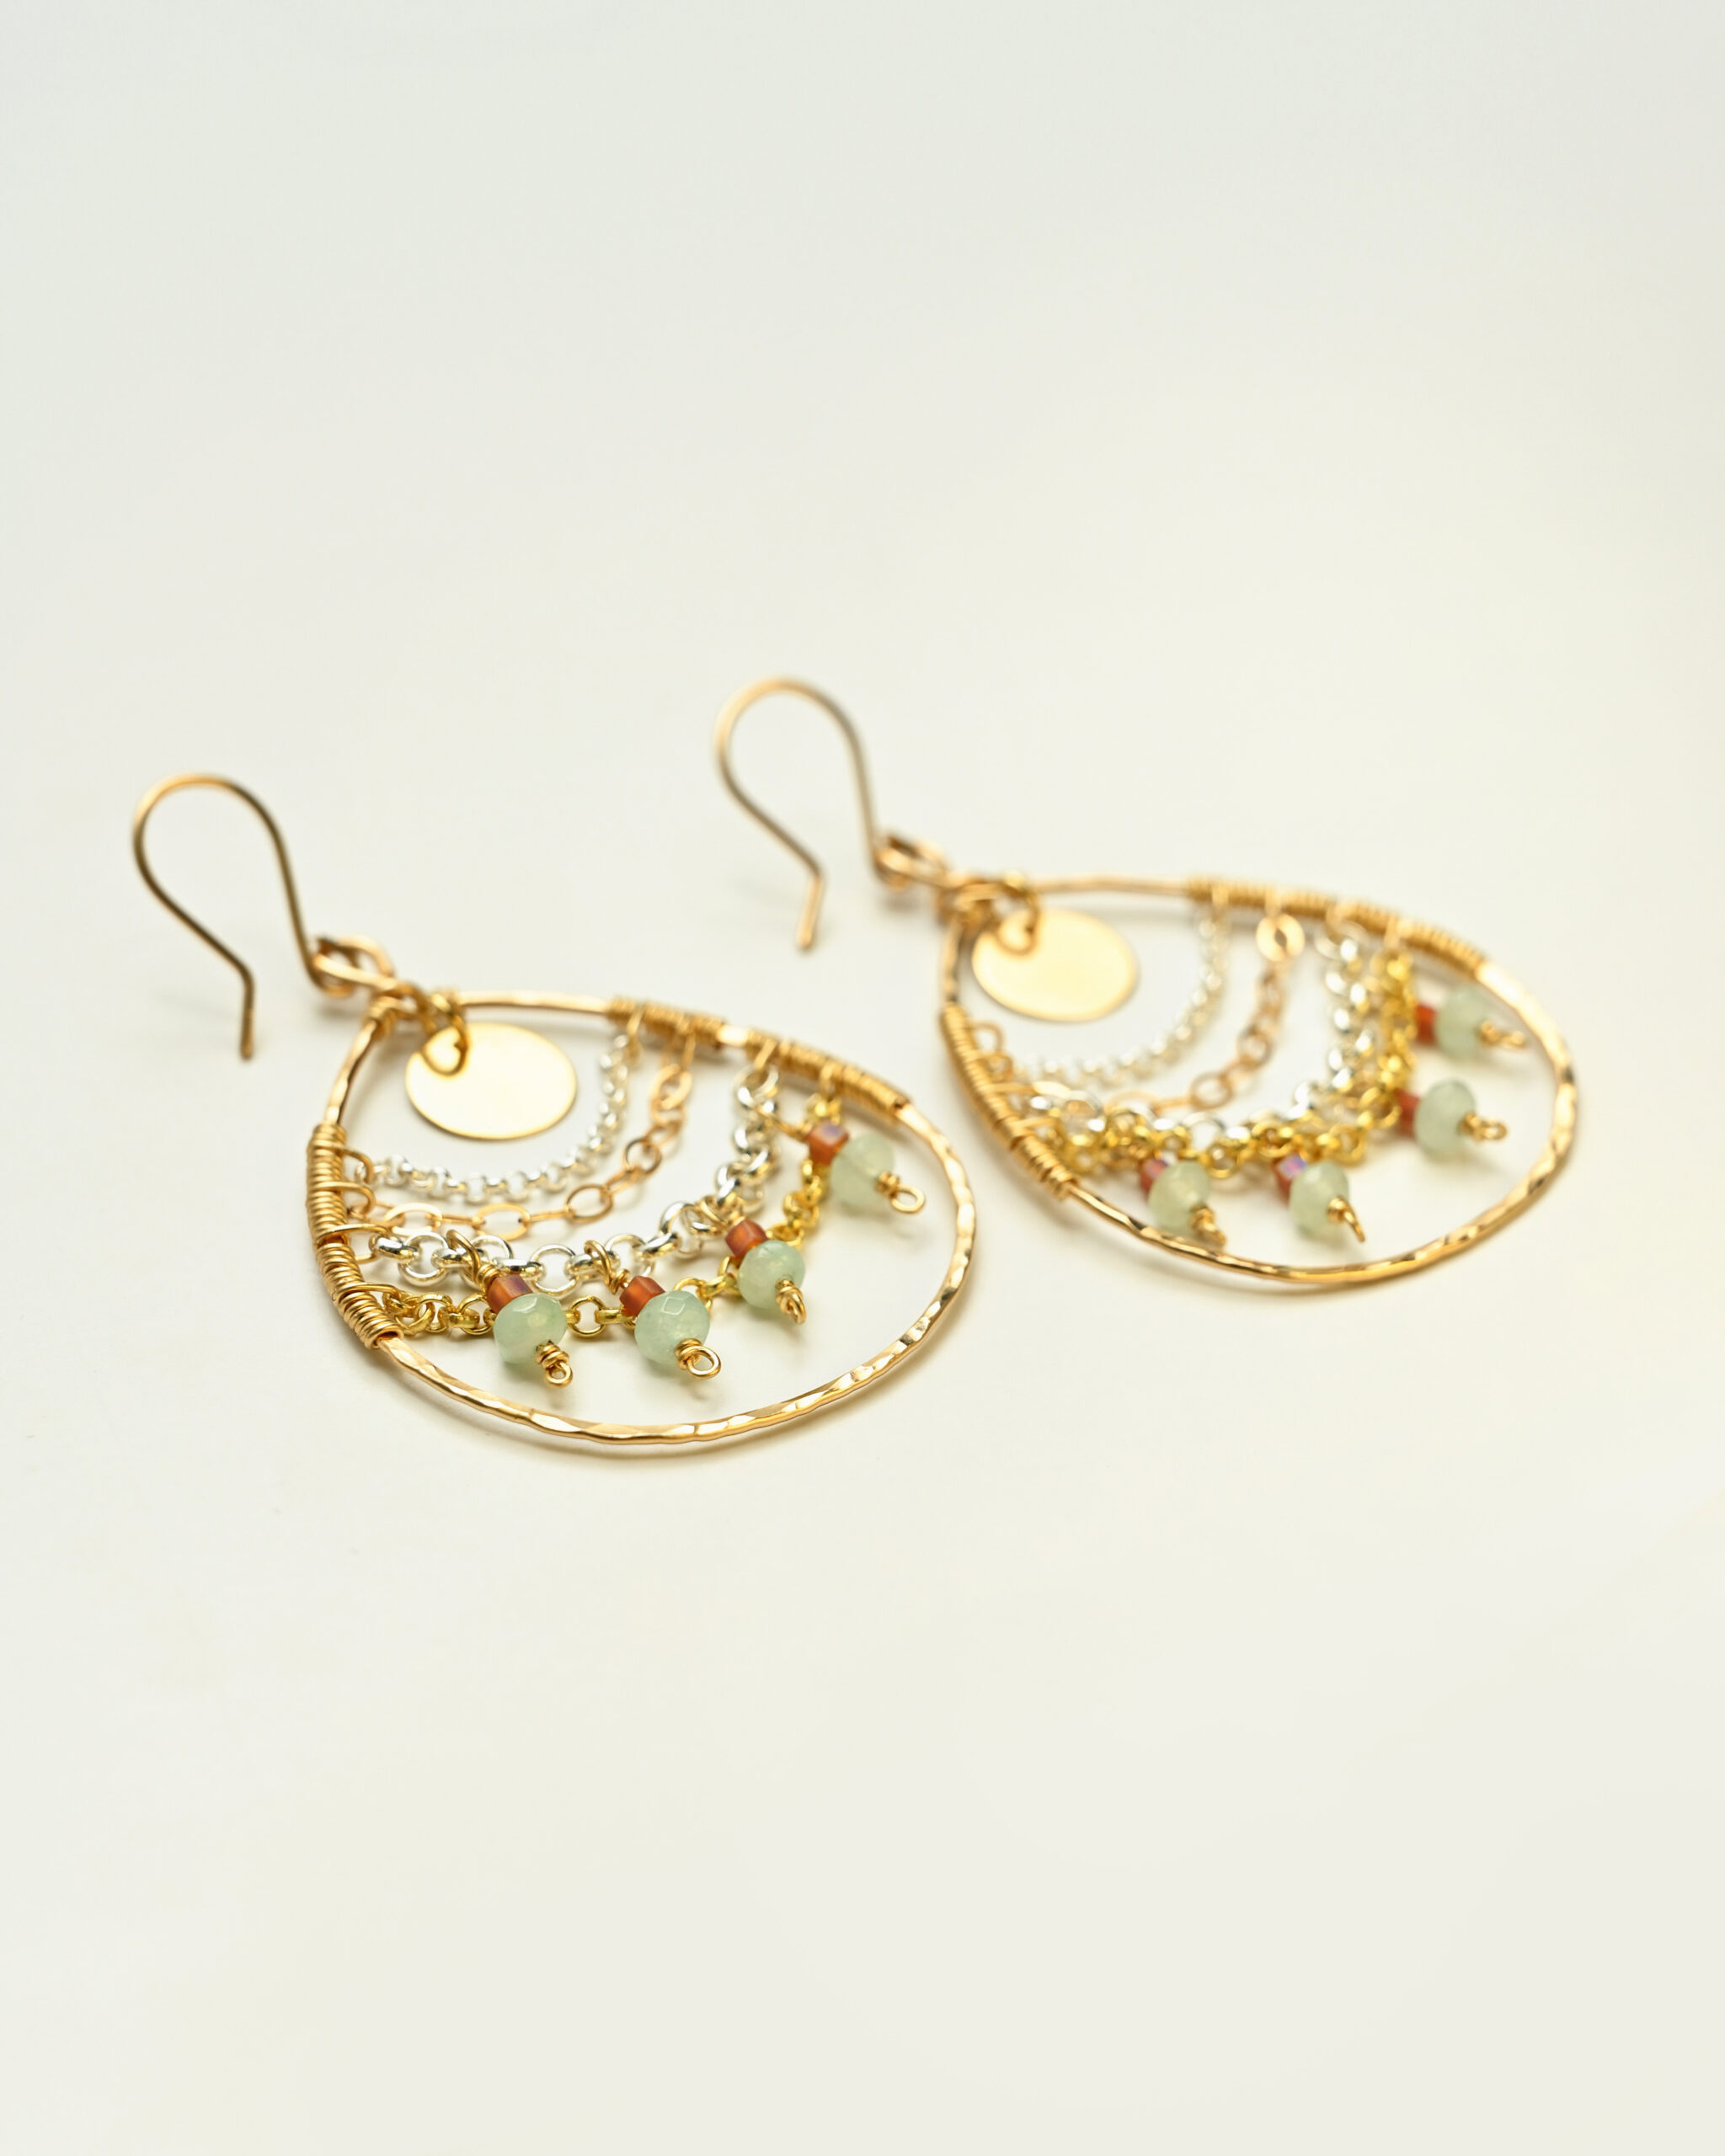 14k gold filled drop earrings with amazonite, AG 925 and gold plated chains